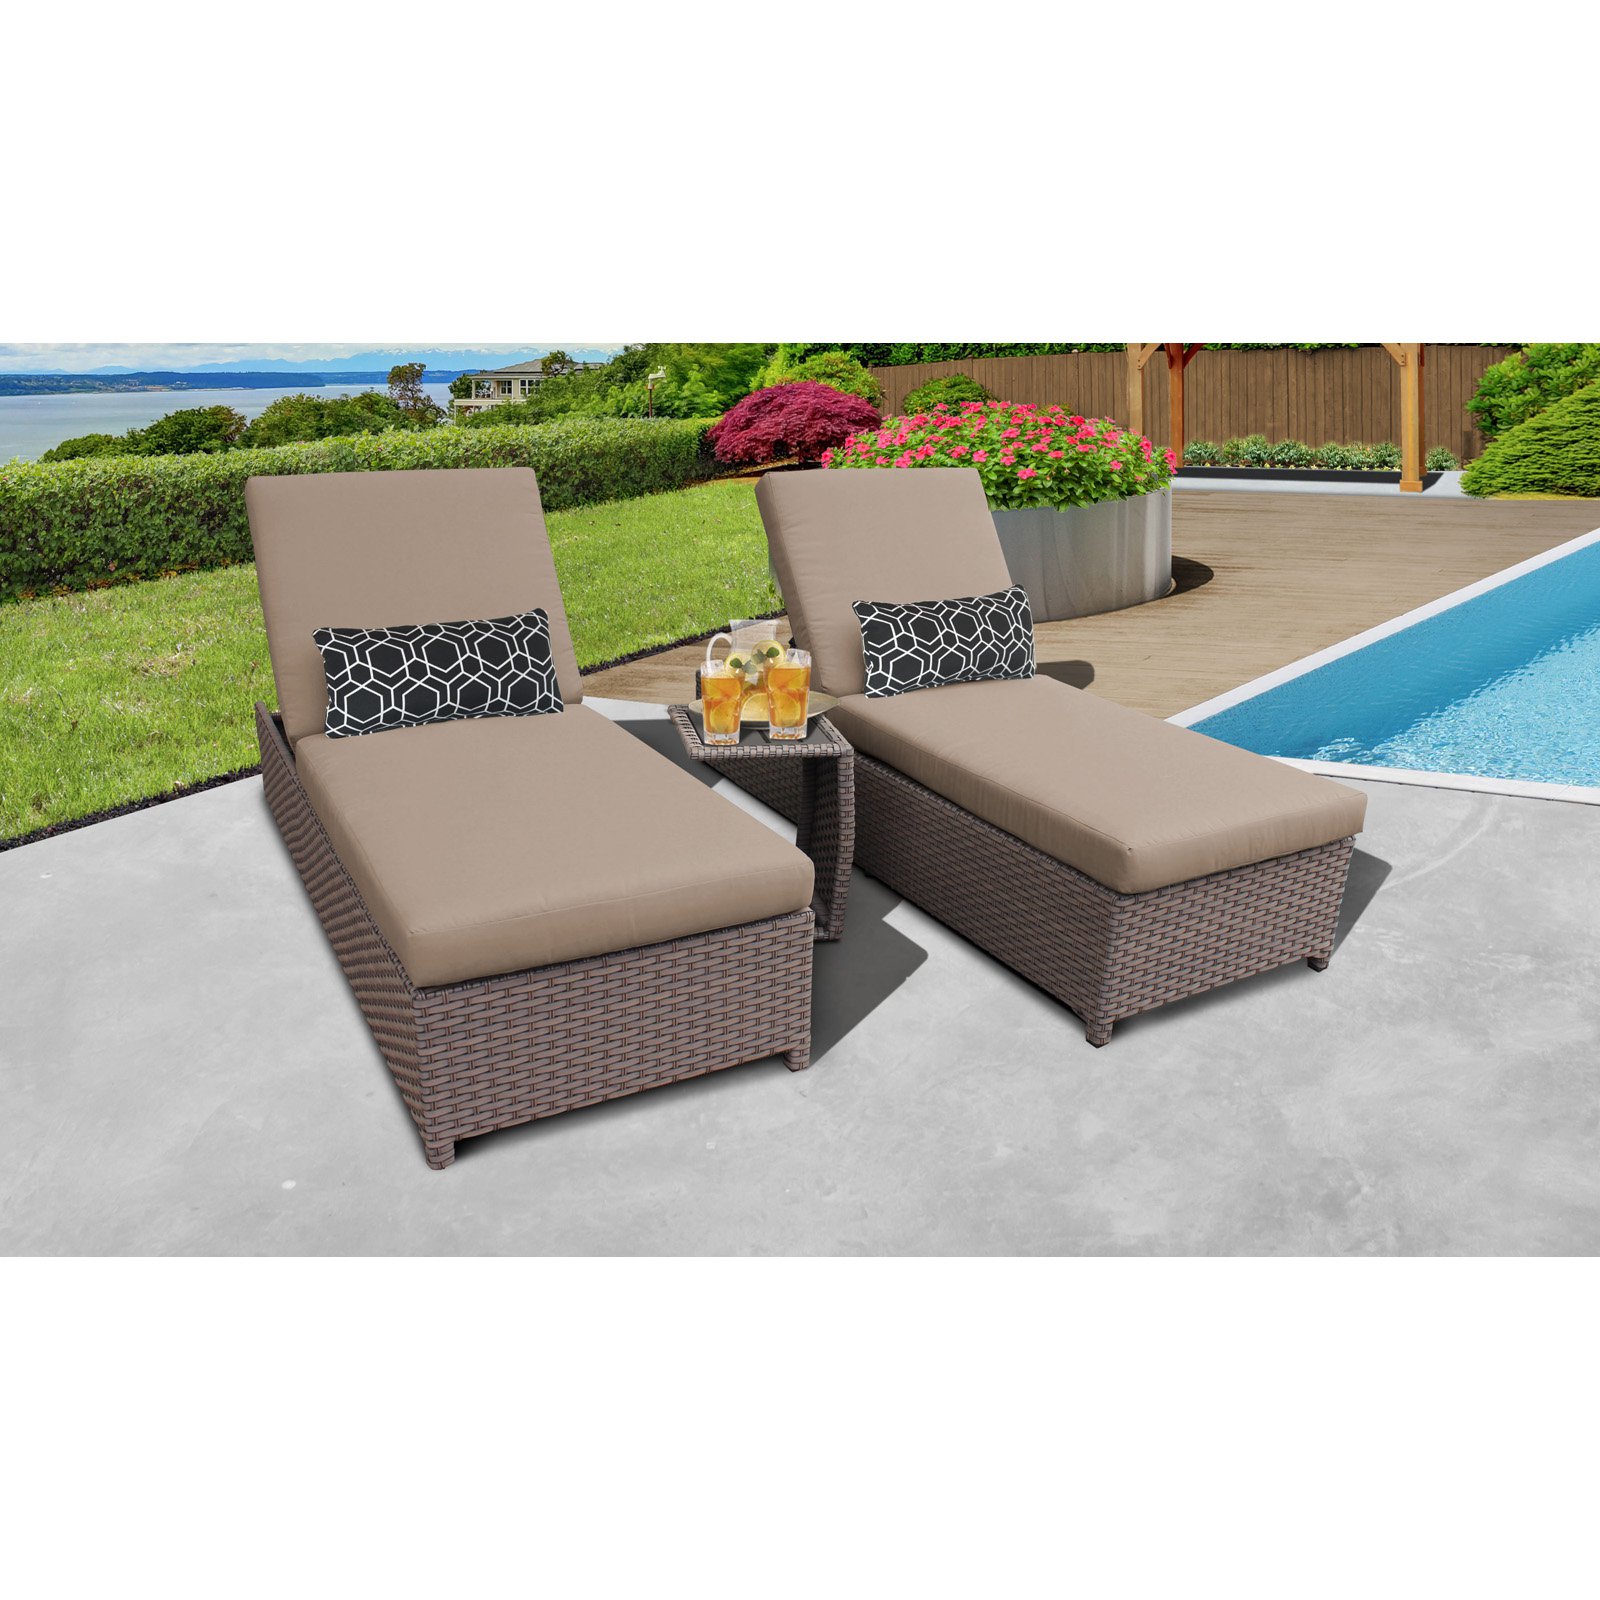 TK Classics Florence 3 Piece Wheeled Wicker Outdoor Chaise Lounge Set - image 3 of 11